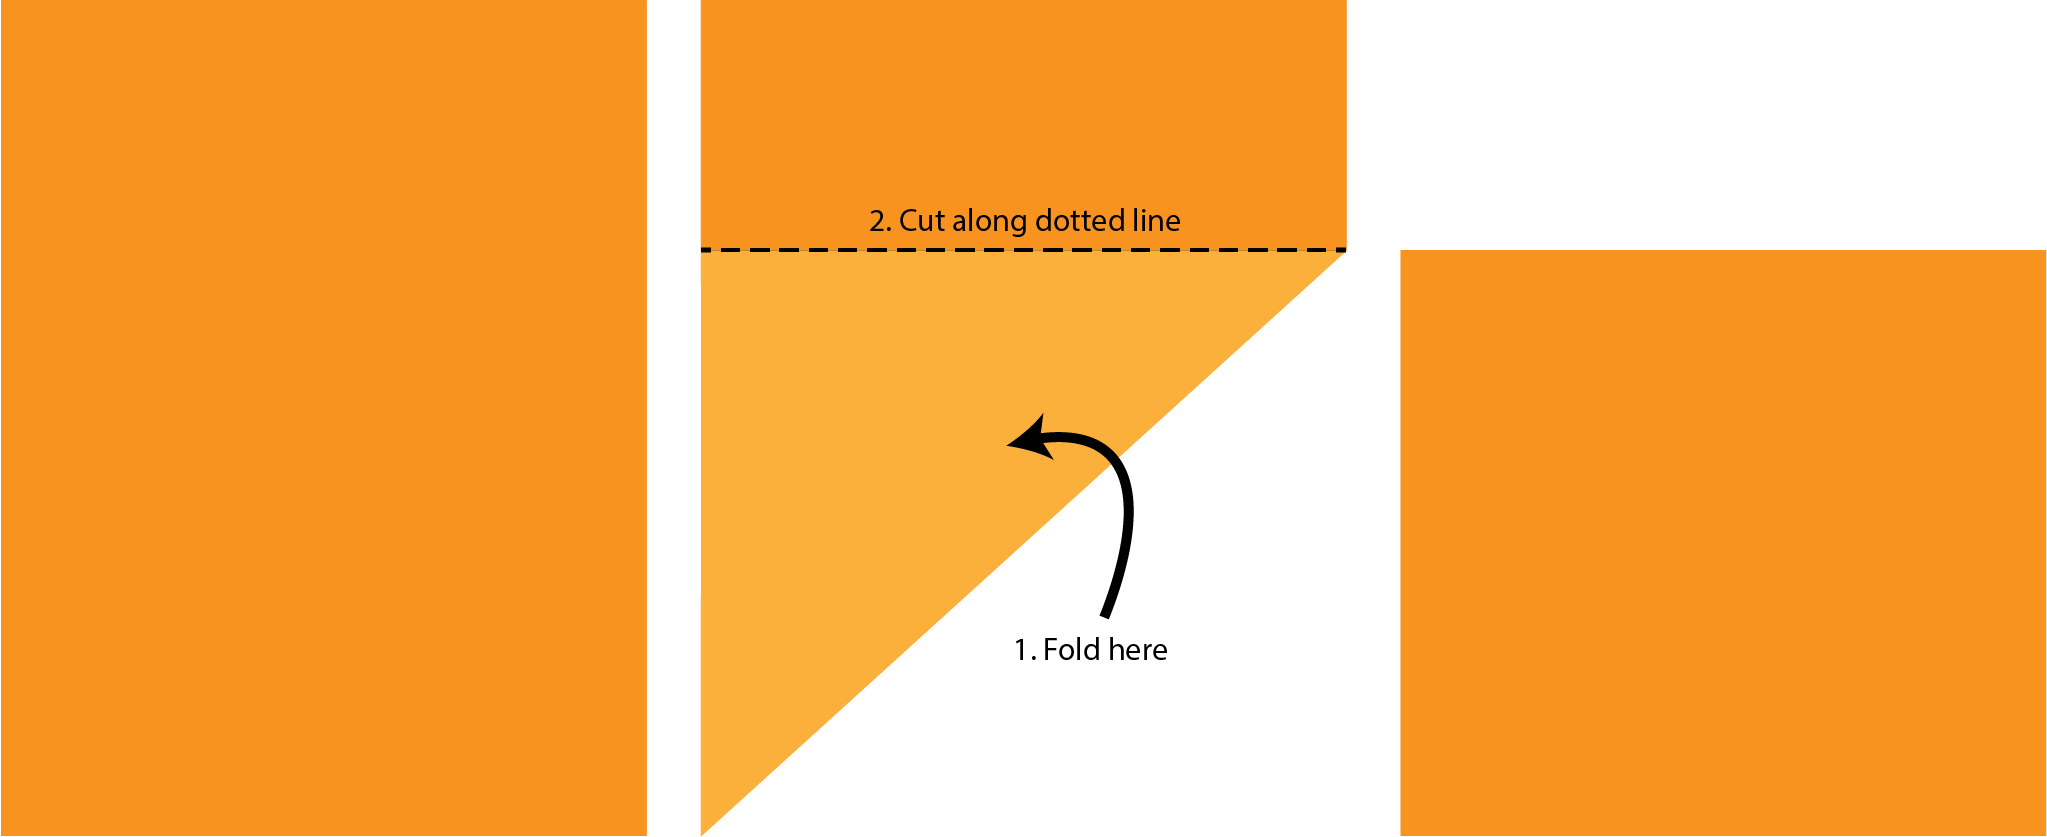 Orange rectangles with text "2. Cut along dotted line", "1. Fold here".